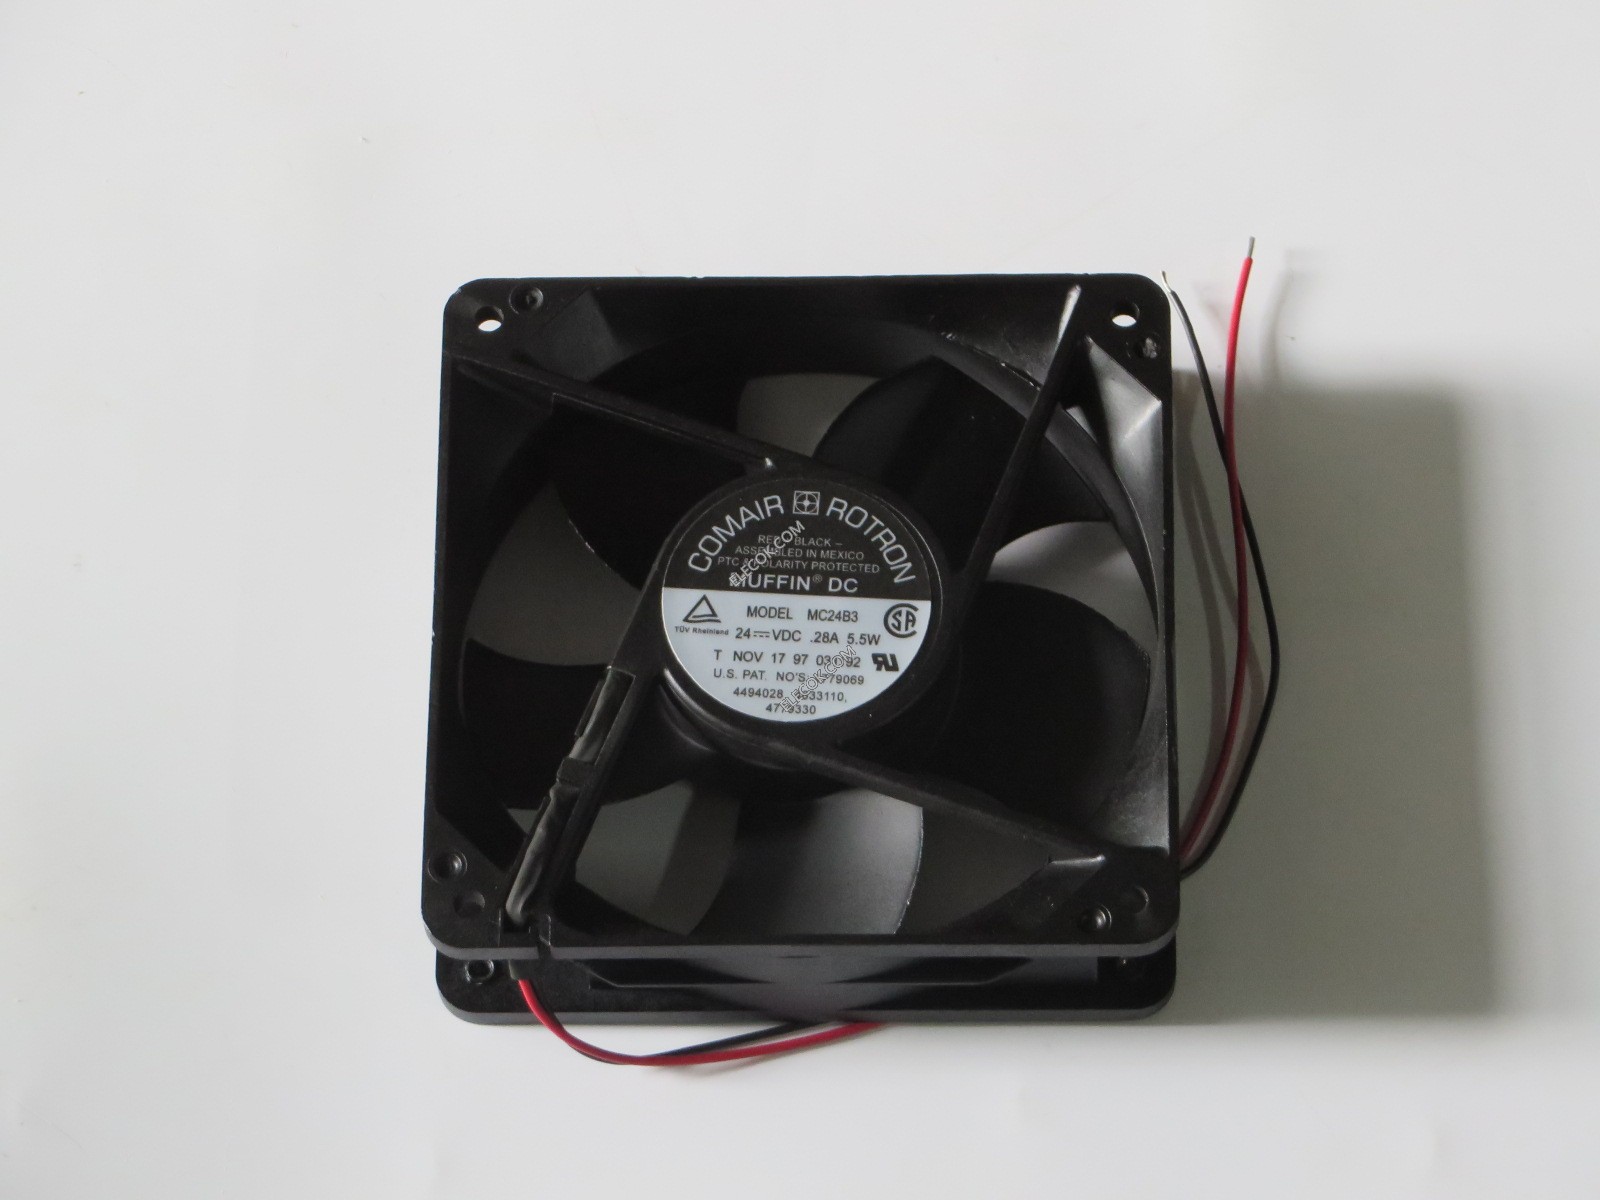 Details about   COMAIR ROTRON MC24B7 24VDC 120mmx120mmx32mm COOLING FAN FREE SHIPPING USED 